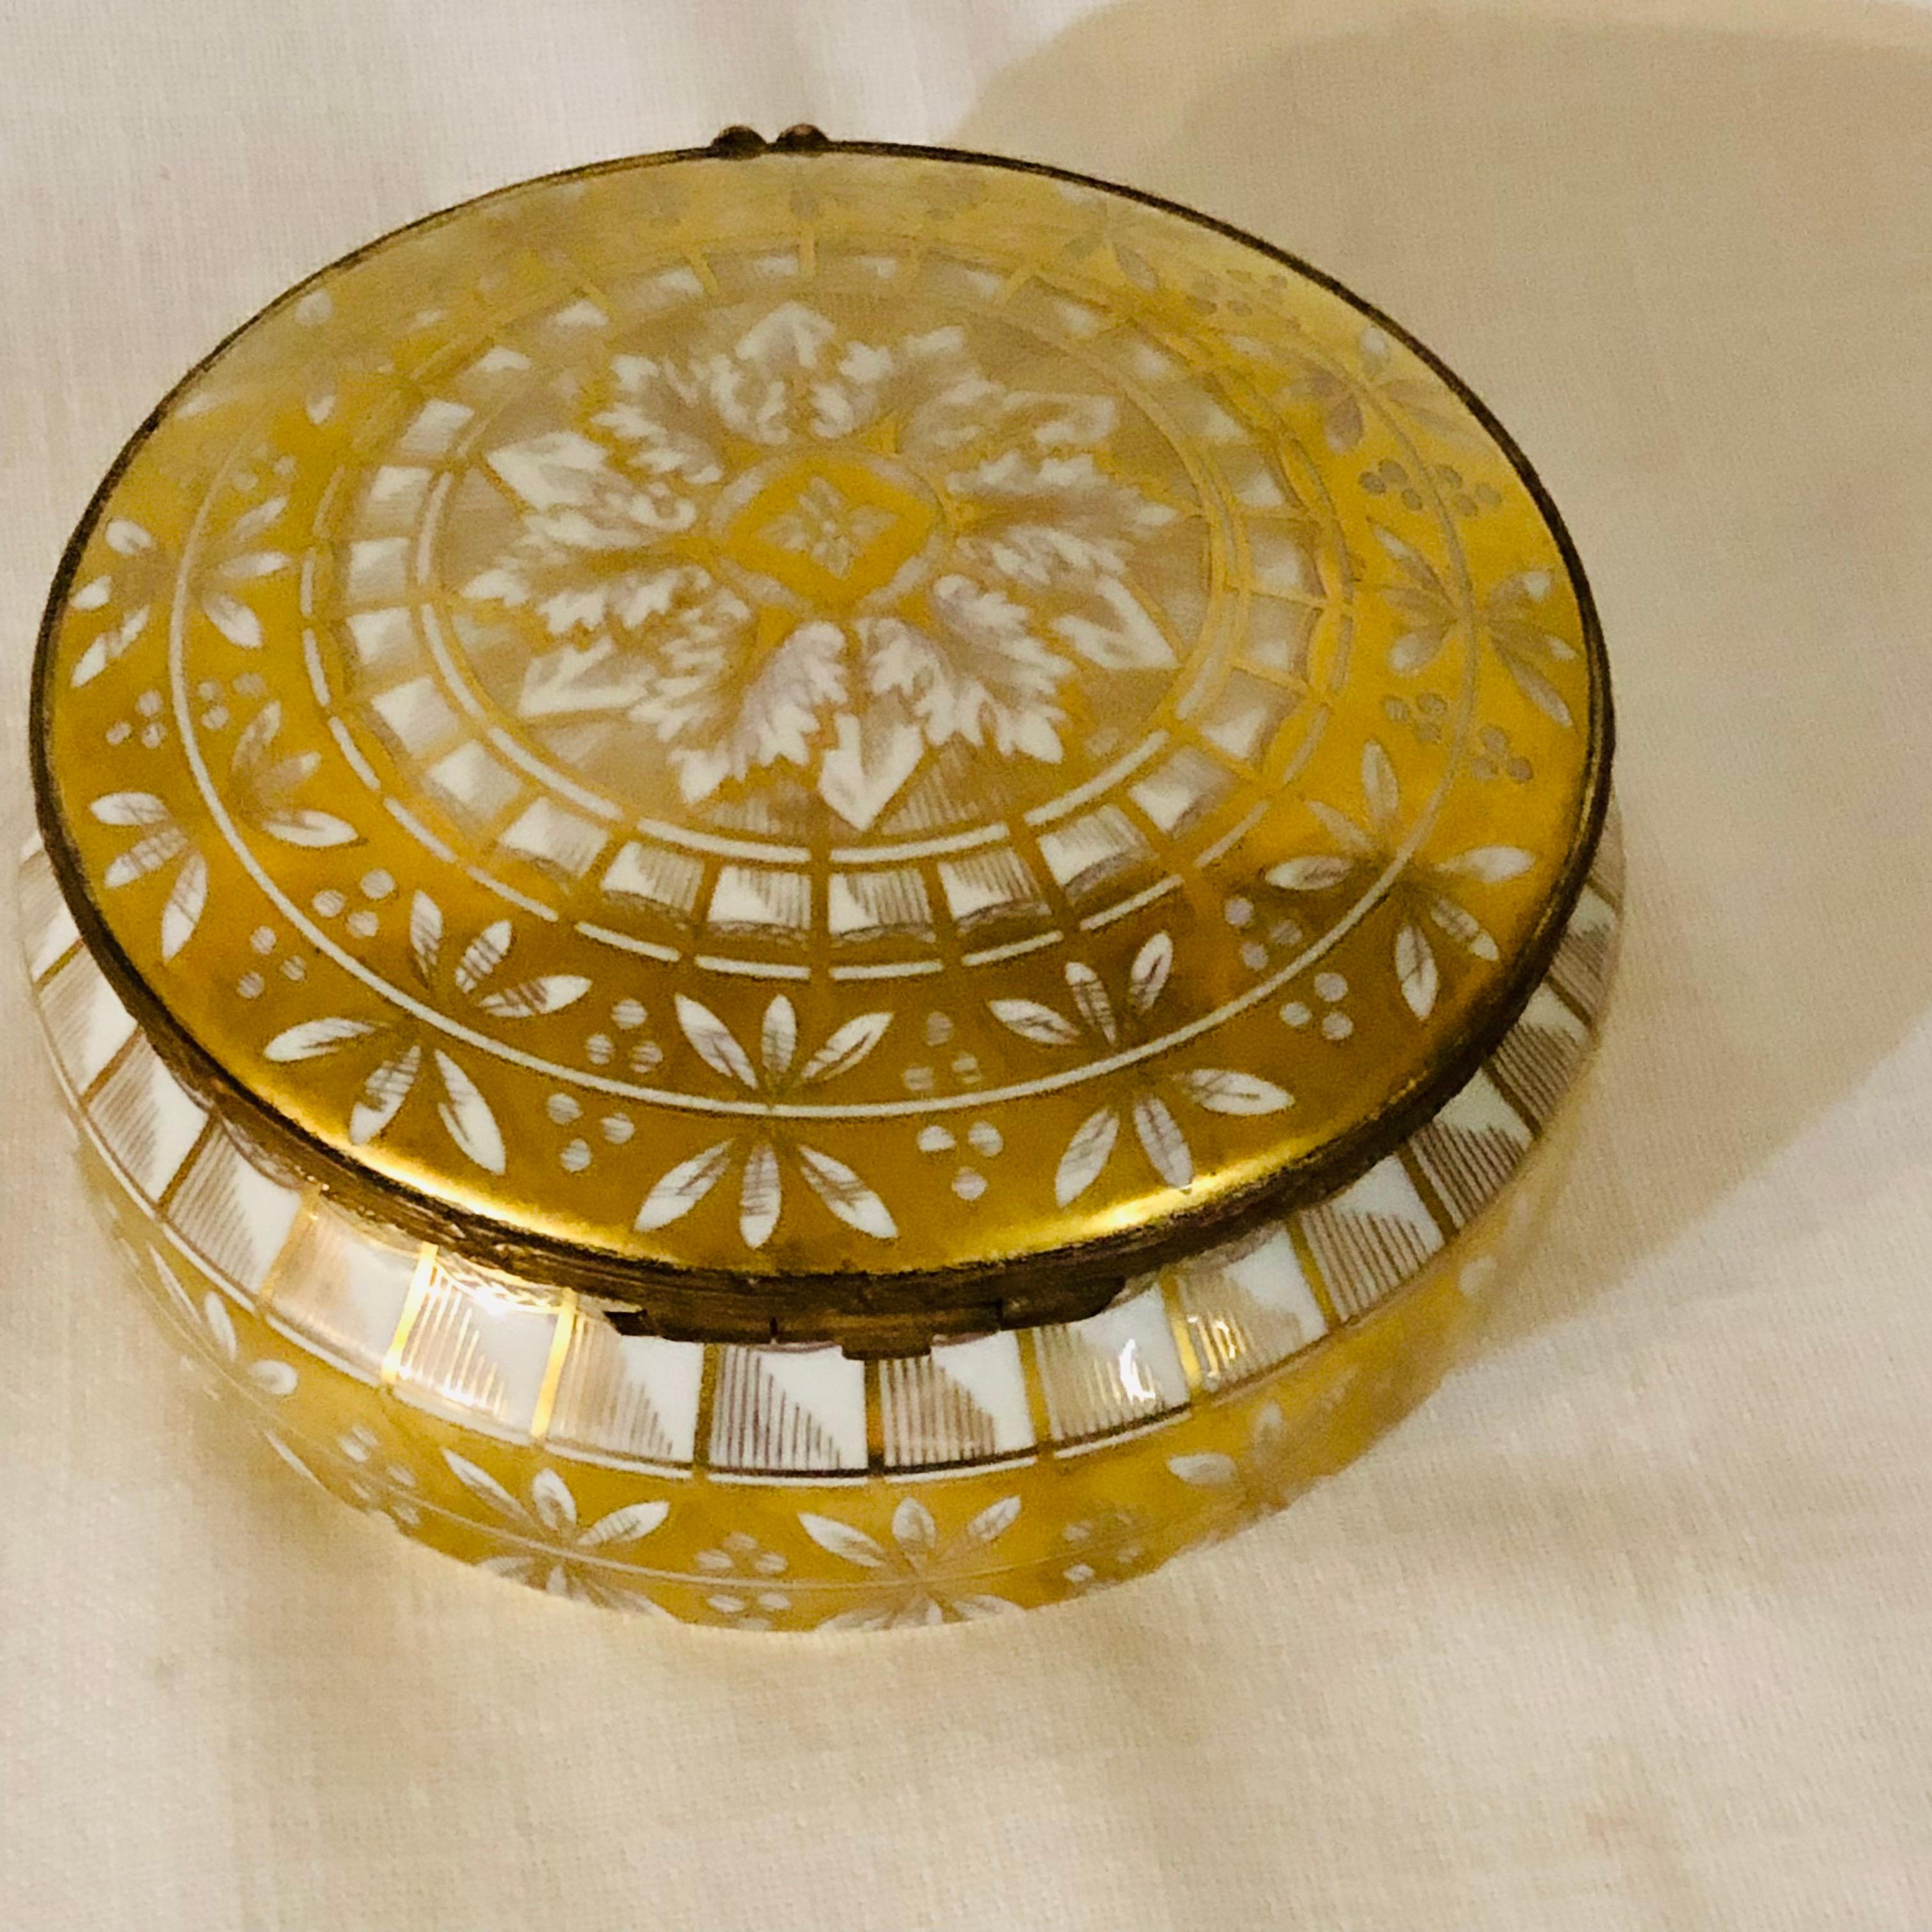 Le Tallec Porcelain Box with Gold Painted Decoration on a White Porcelain Ground 6